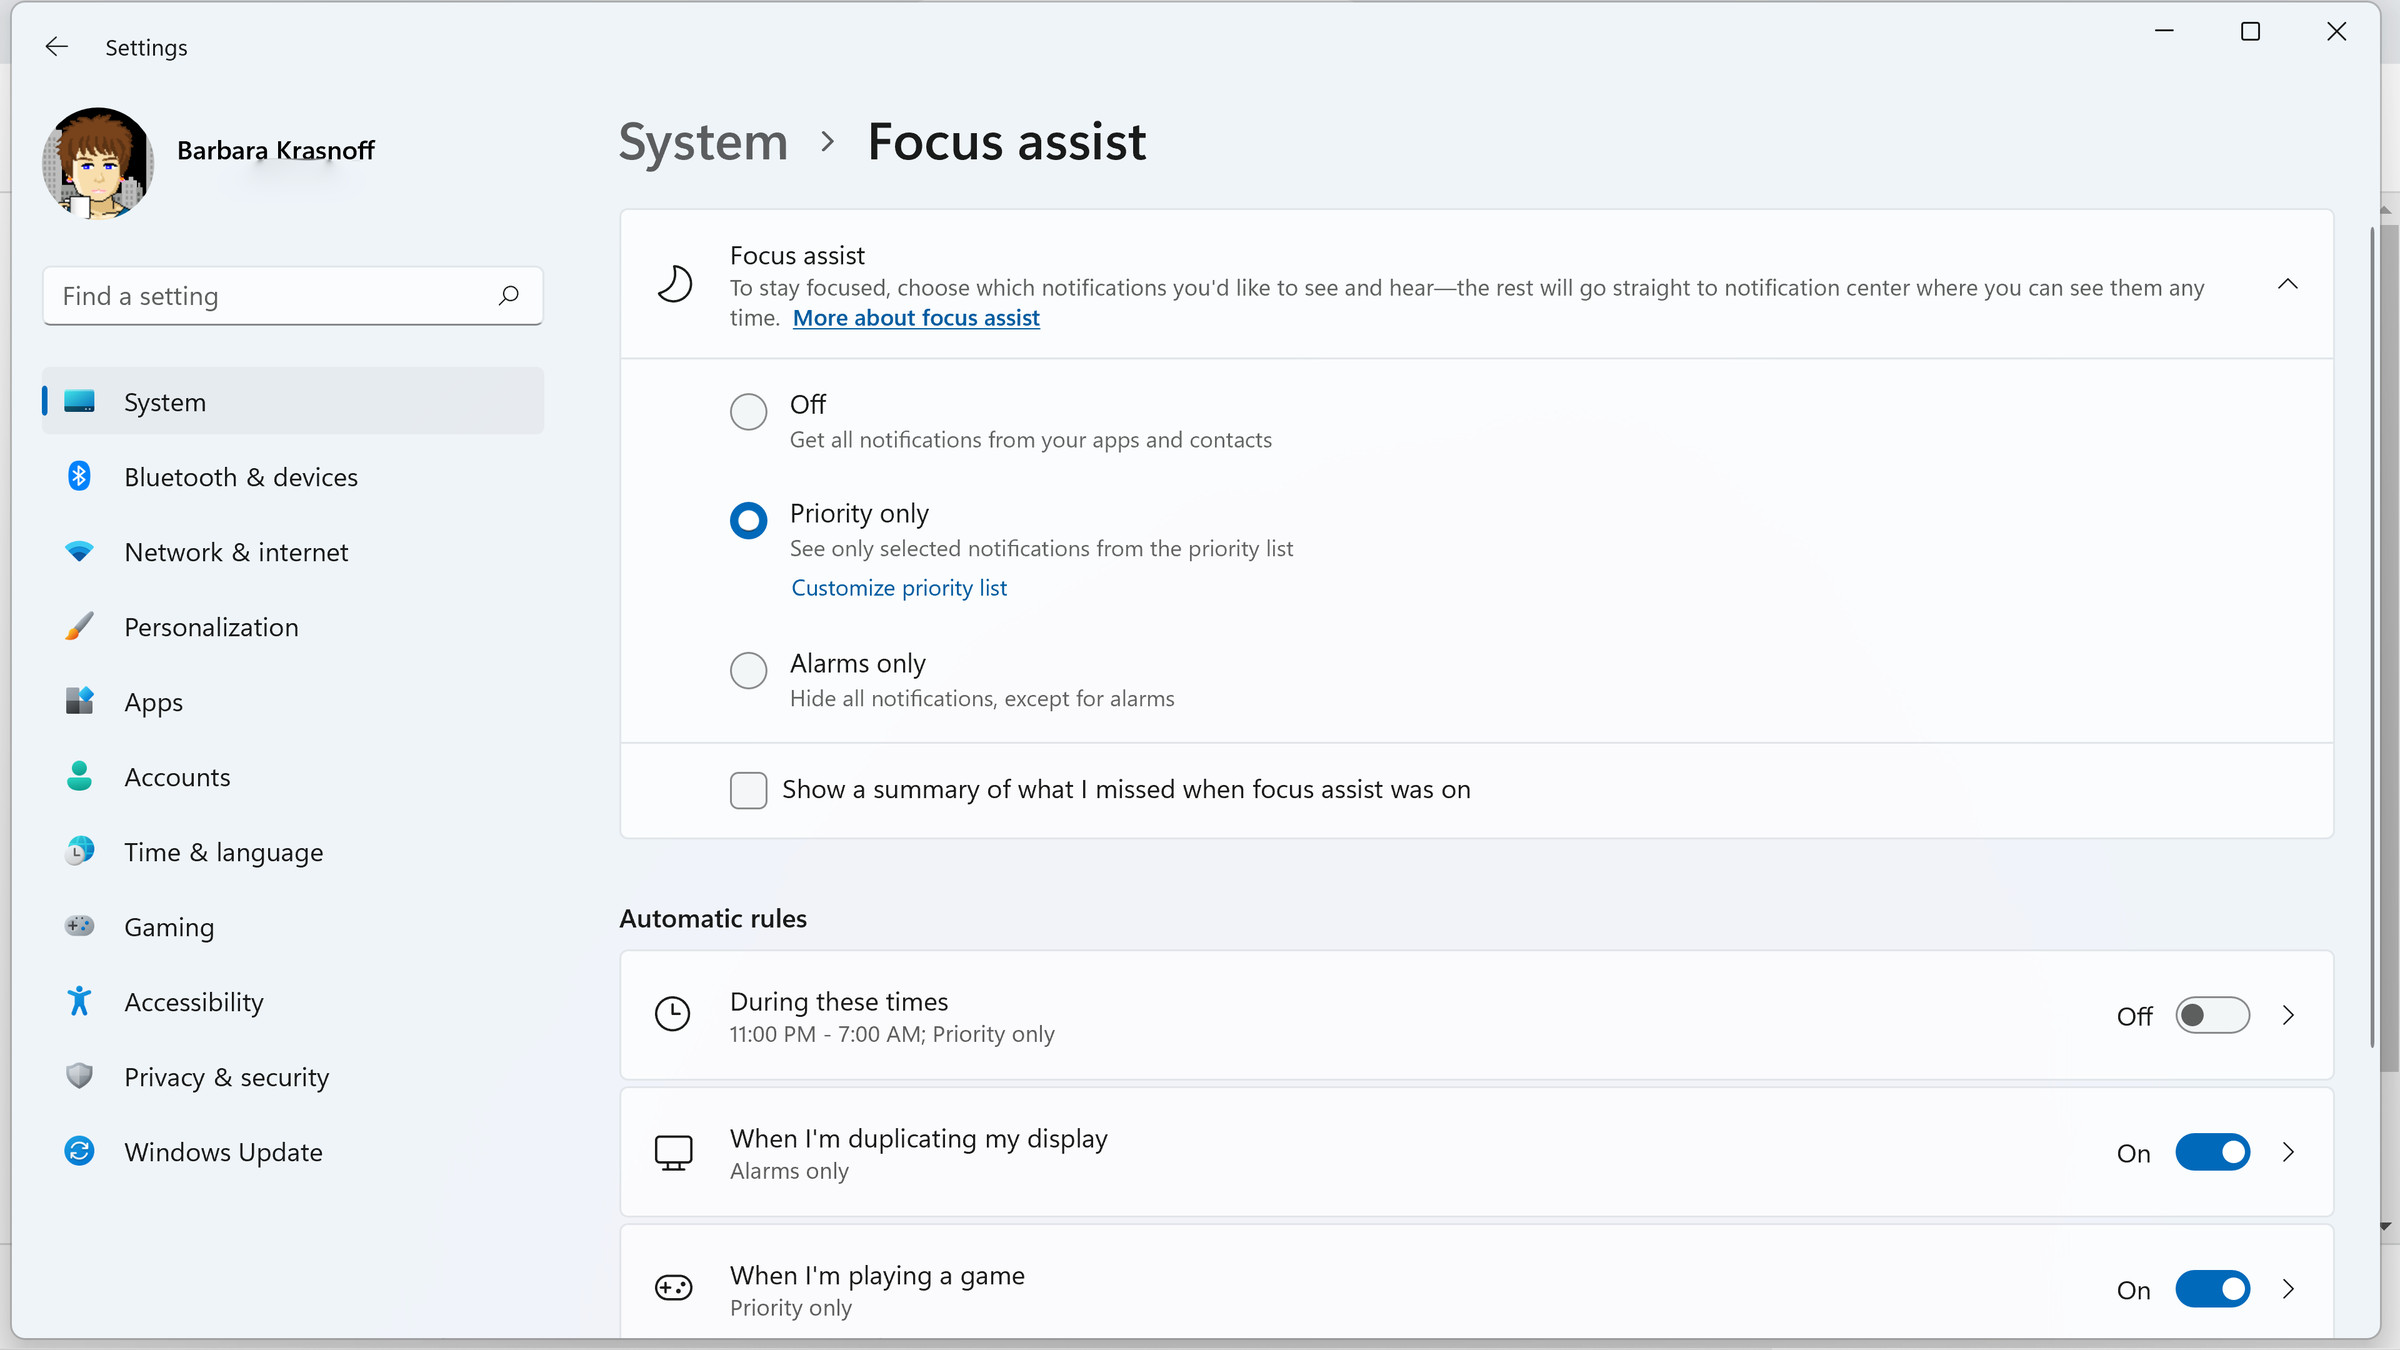 Within system settings, you can decide when you want Focus assist to activate, and for which notifications.